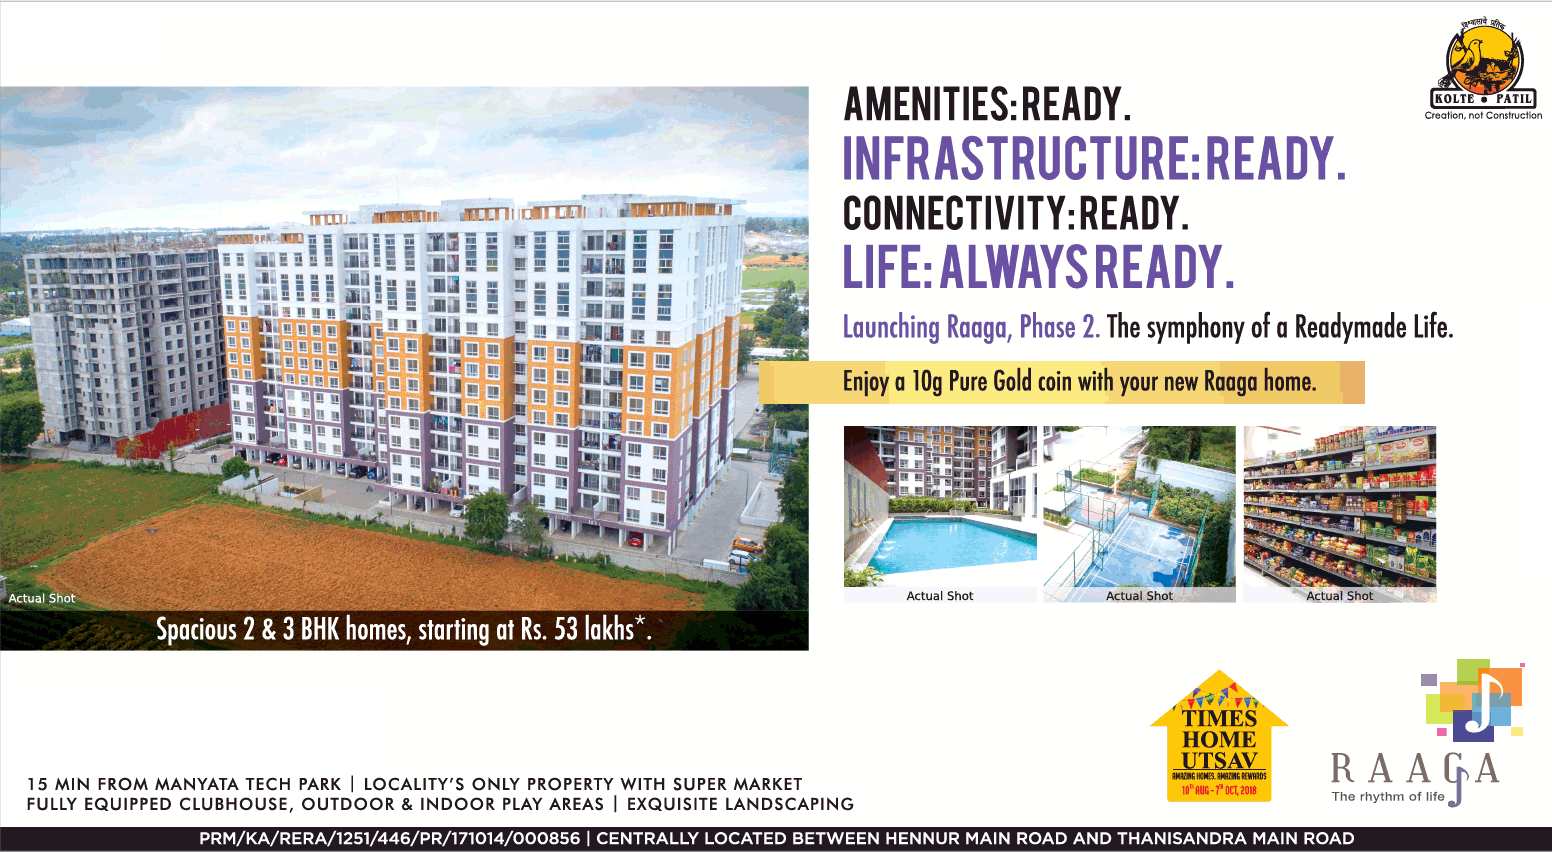 Enjoy a 10 g pure gold coin with your new Kolte Patil Raaga home in Bangalore Update